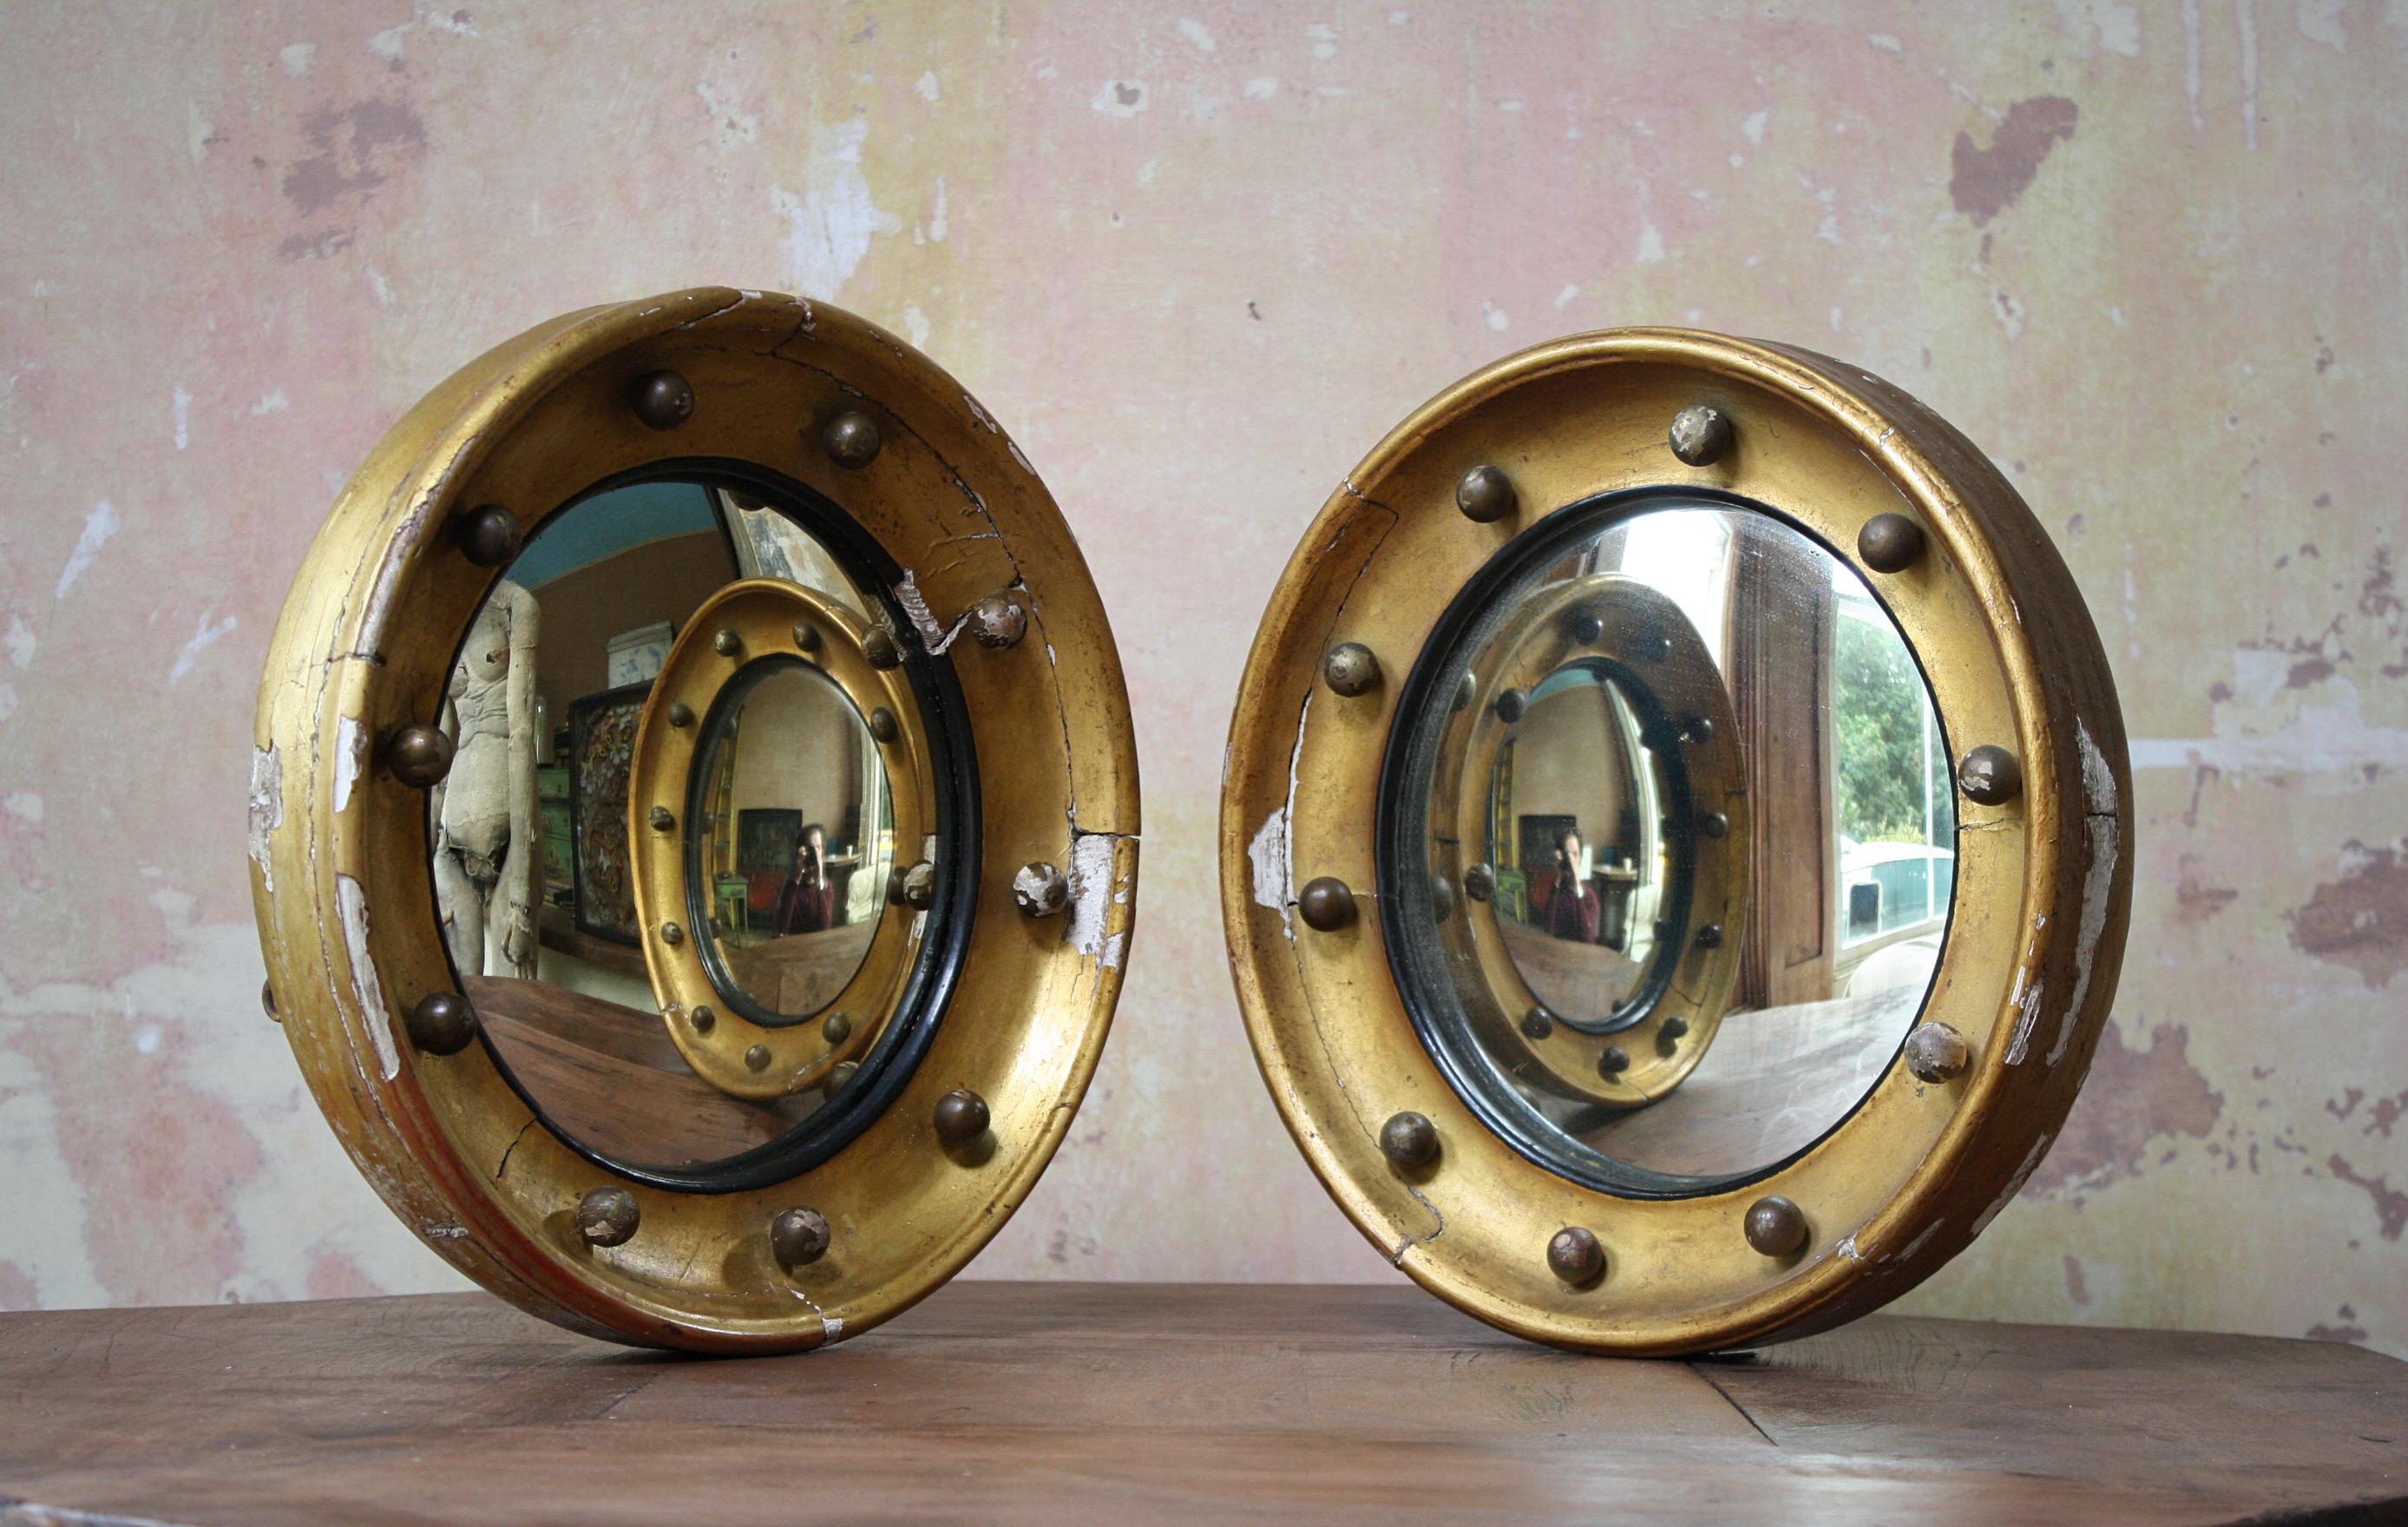 A matching pair of early 19th century convex mirrors, with typical ball decoration, faux ebonised slips and gilt work. 

The mirrors are in very much untouched condition with losses to the gilding and gesso, some very minor foxing to the mirror